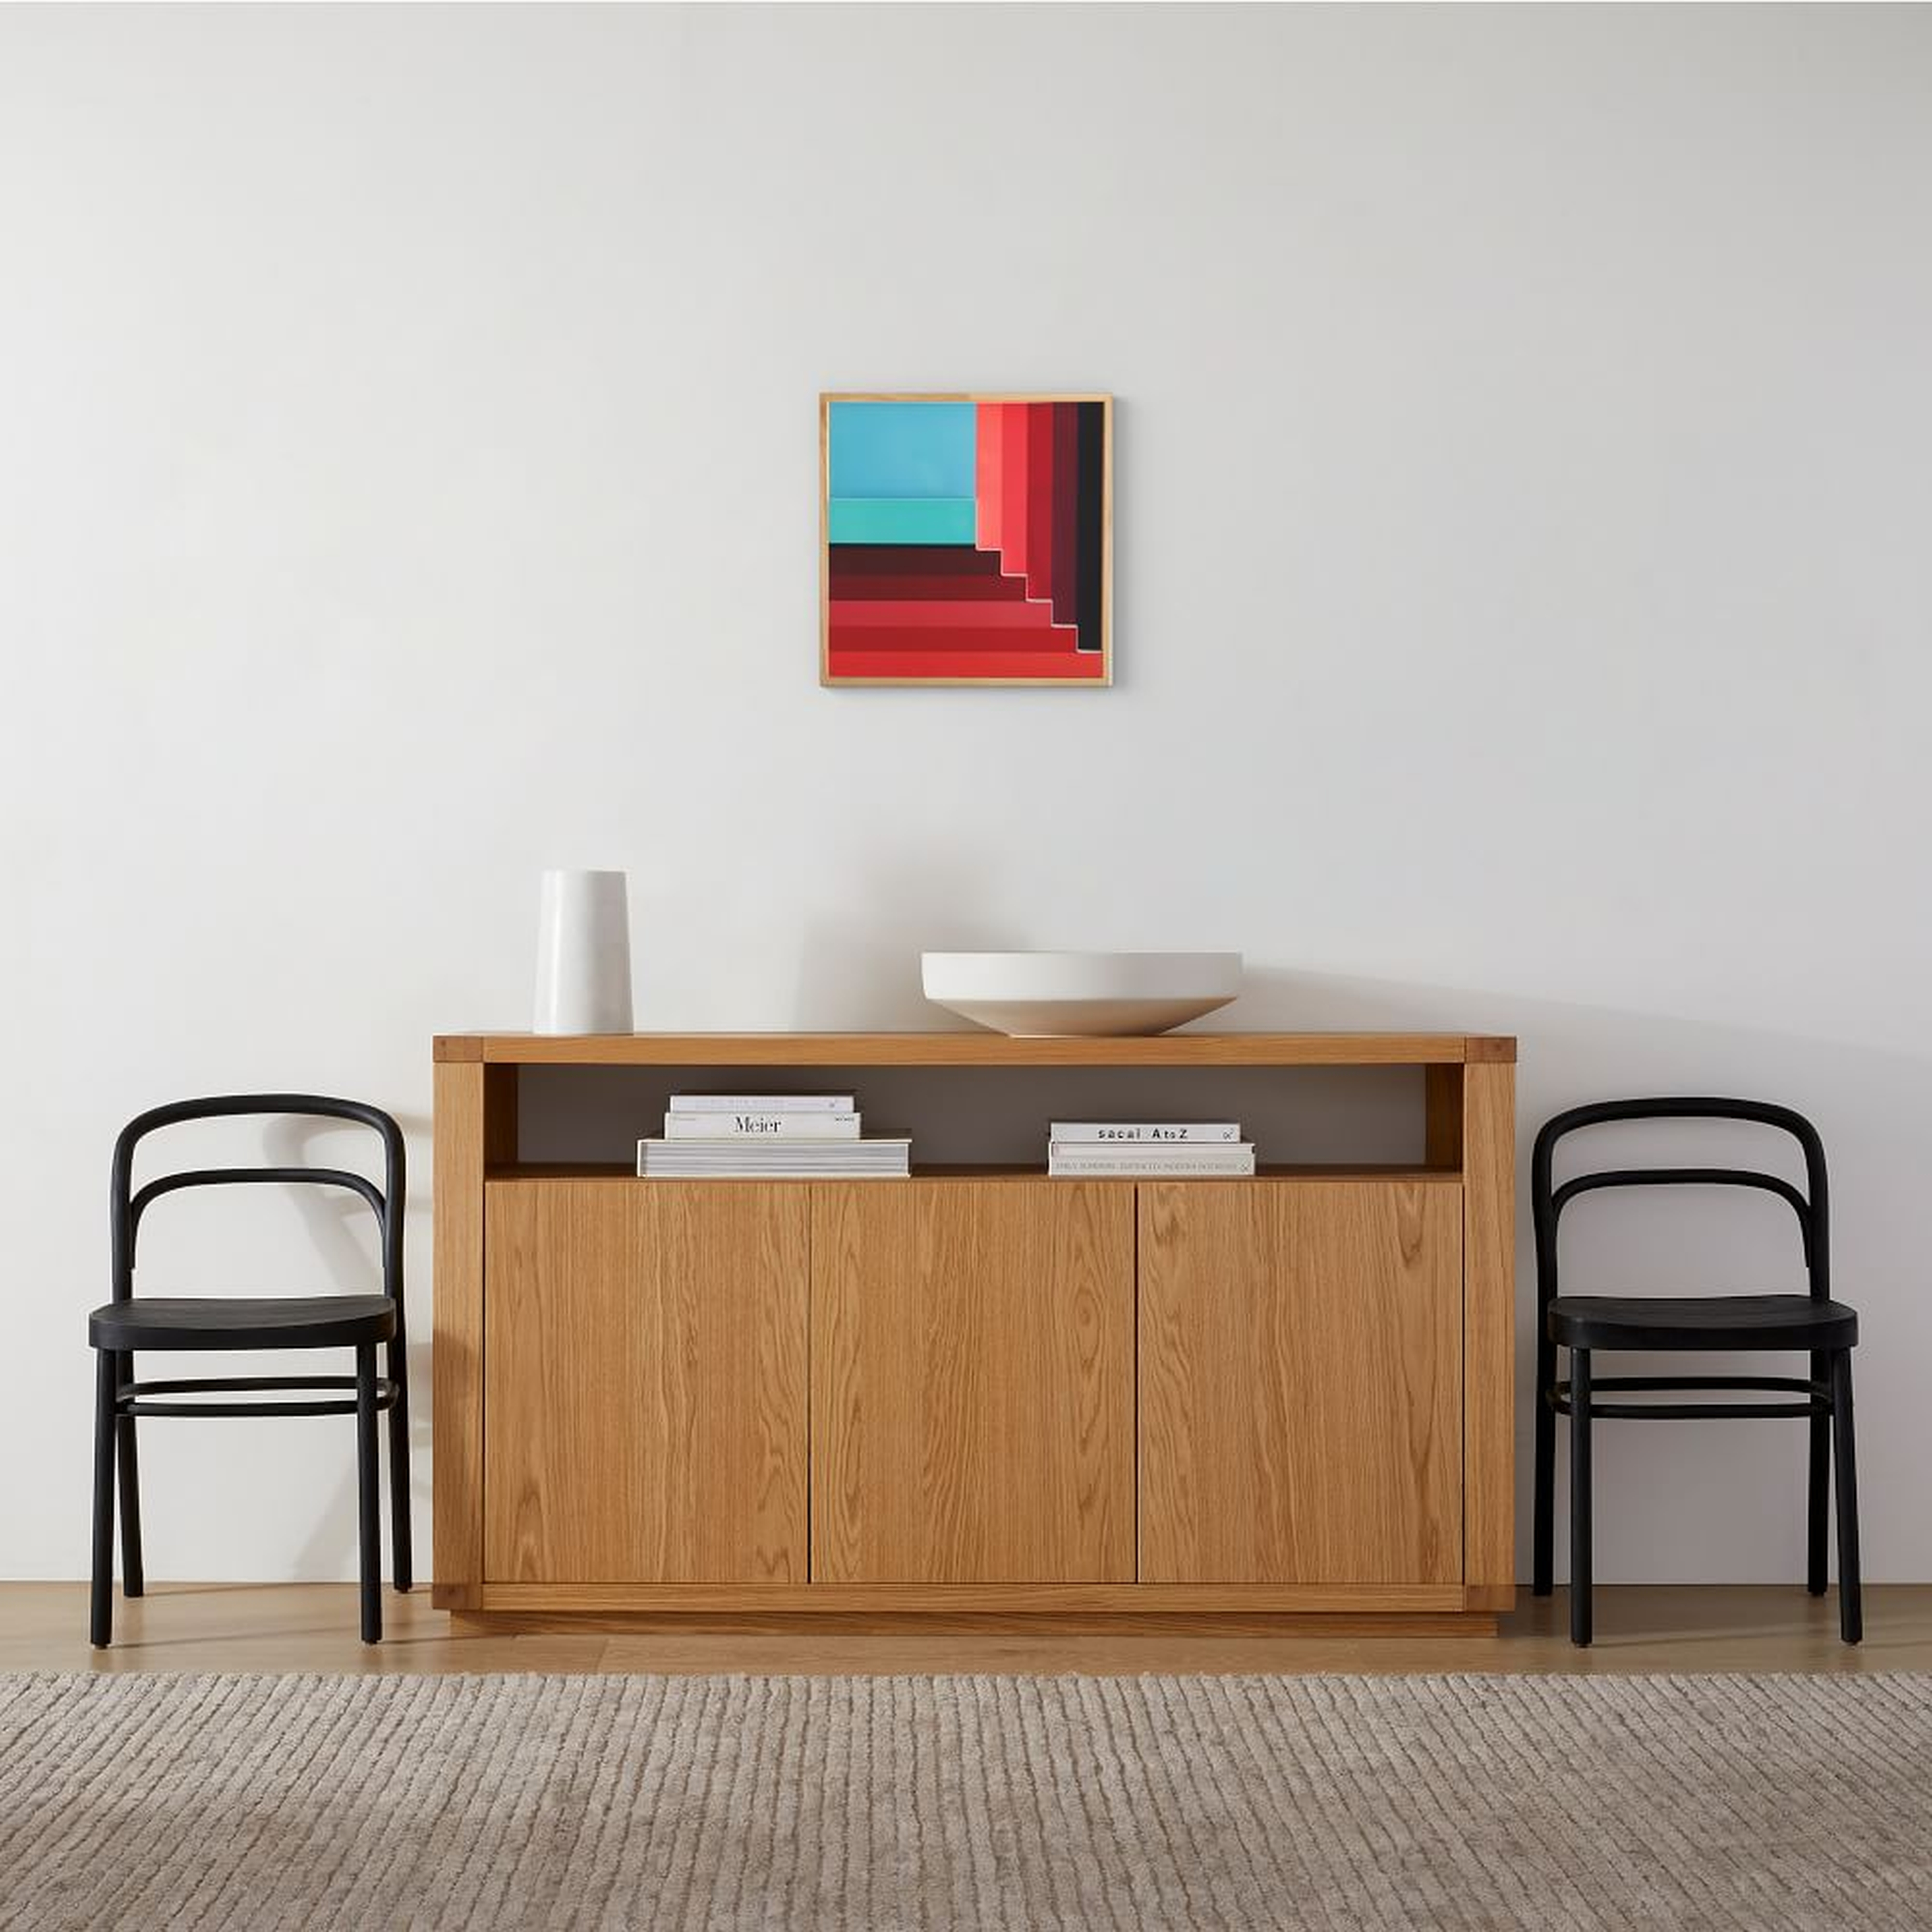 Margo Selby Colorblock Lacquer Wall Art, Red Multi - West Elm